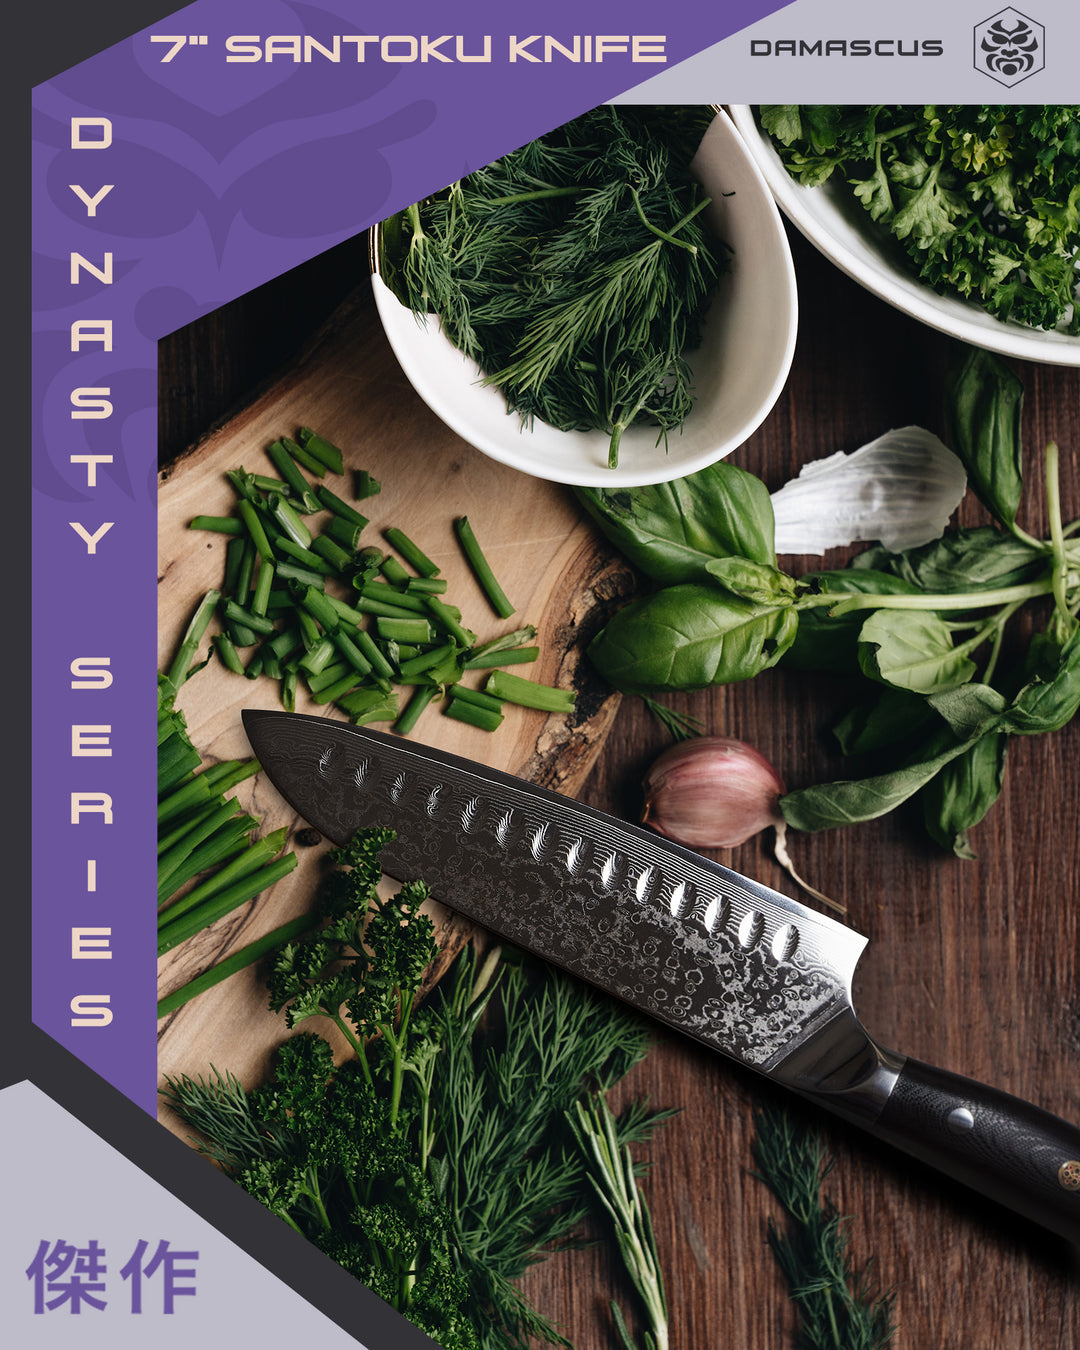 The Dynasty Damascus Santoku after dicing green onions, and surrounded by herbs and garlic.